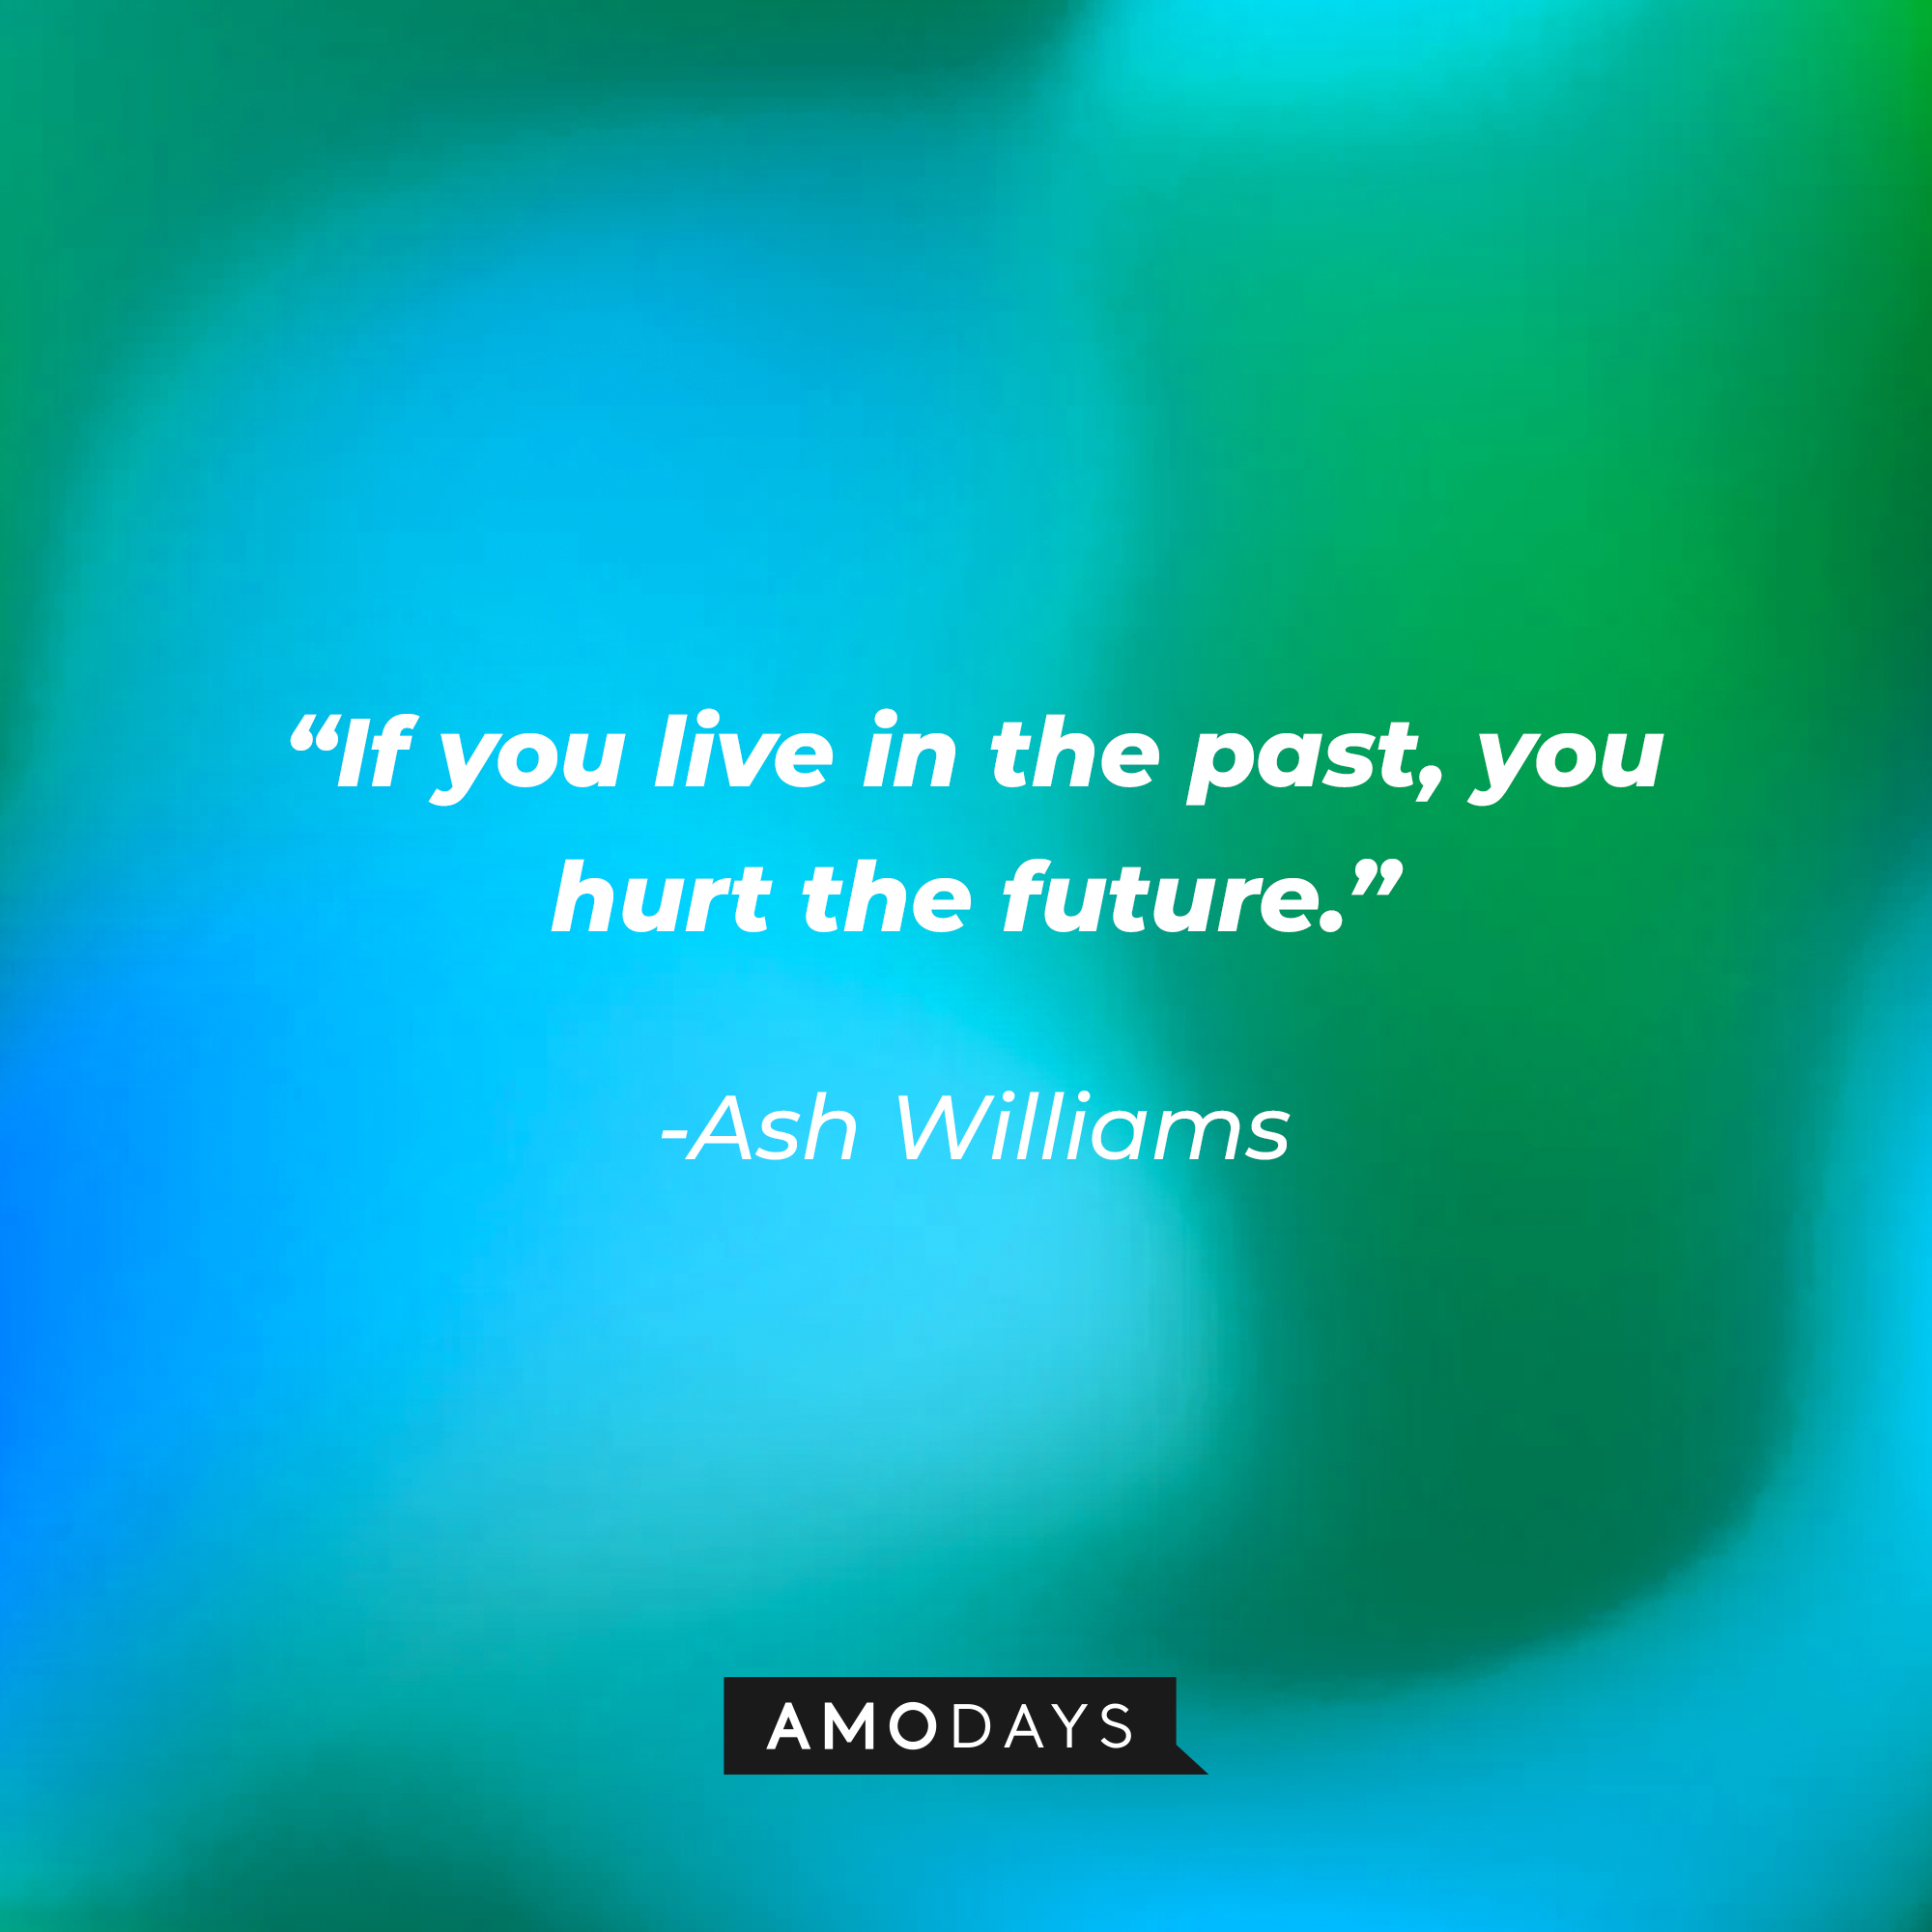 Ash Williams' quote: “If you live in the past, you hurt the future.” | Source: Amodays